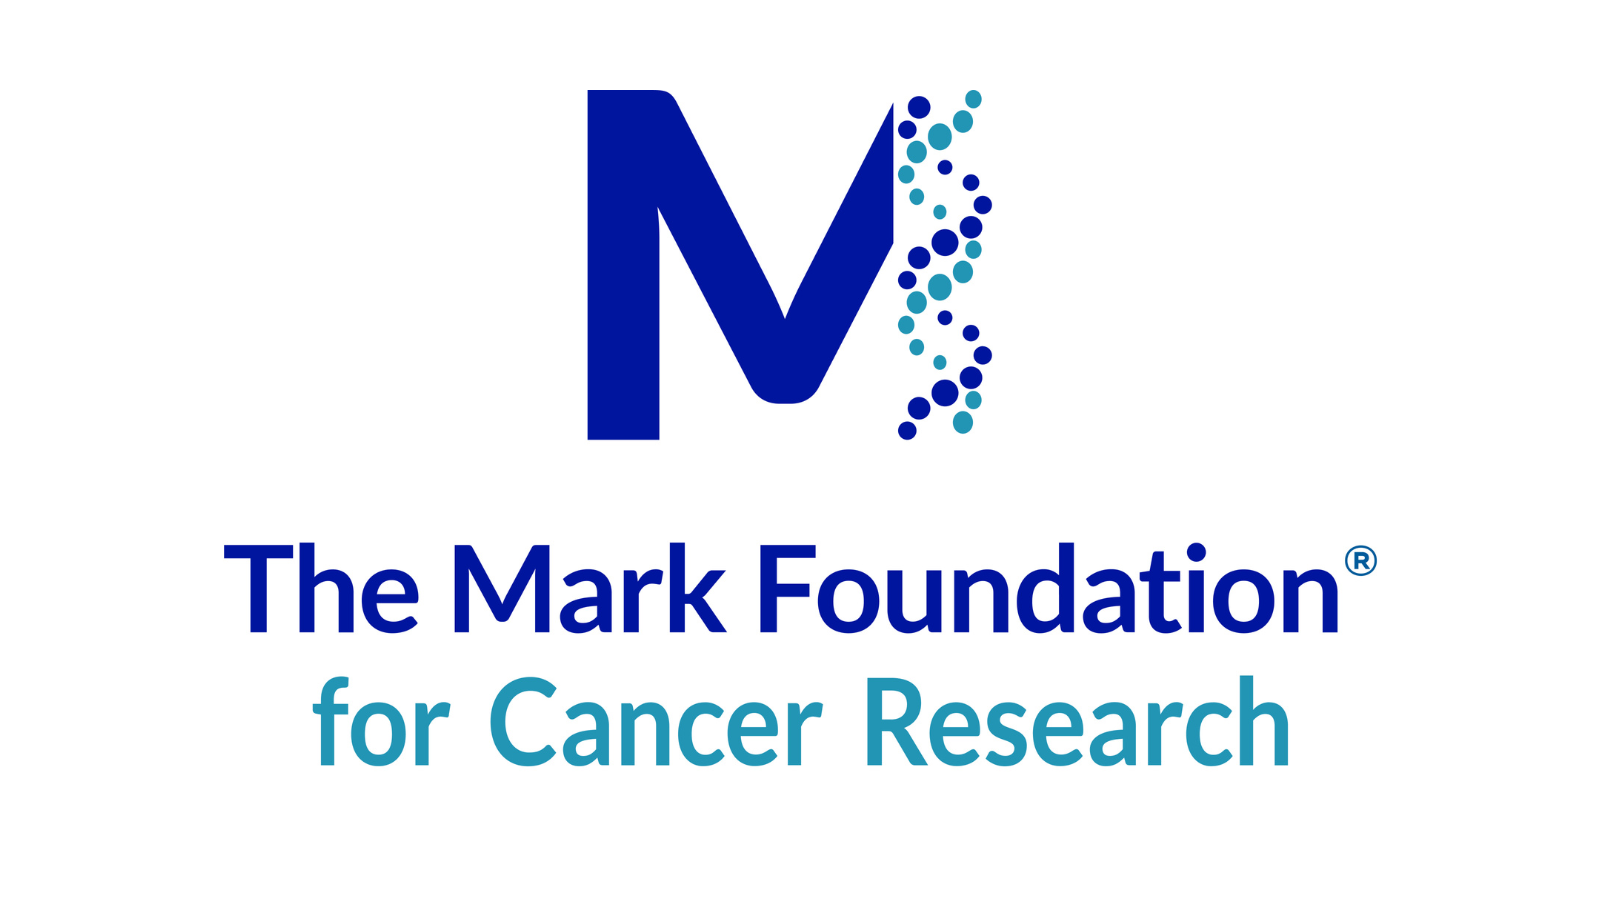 The Mark Foundation for Cancer Research